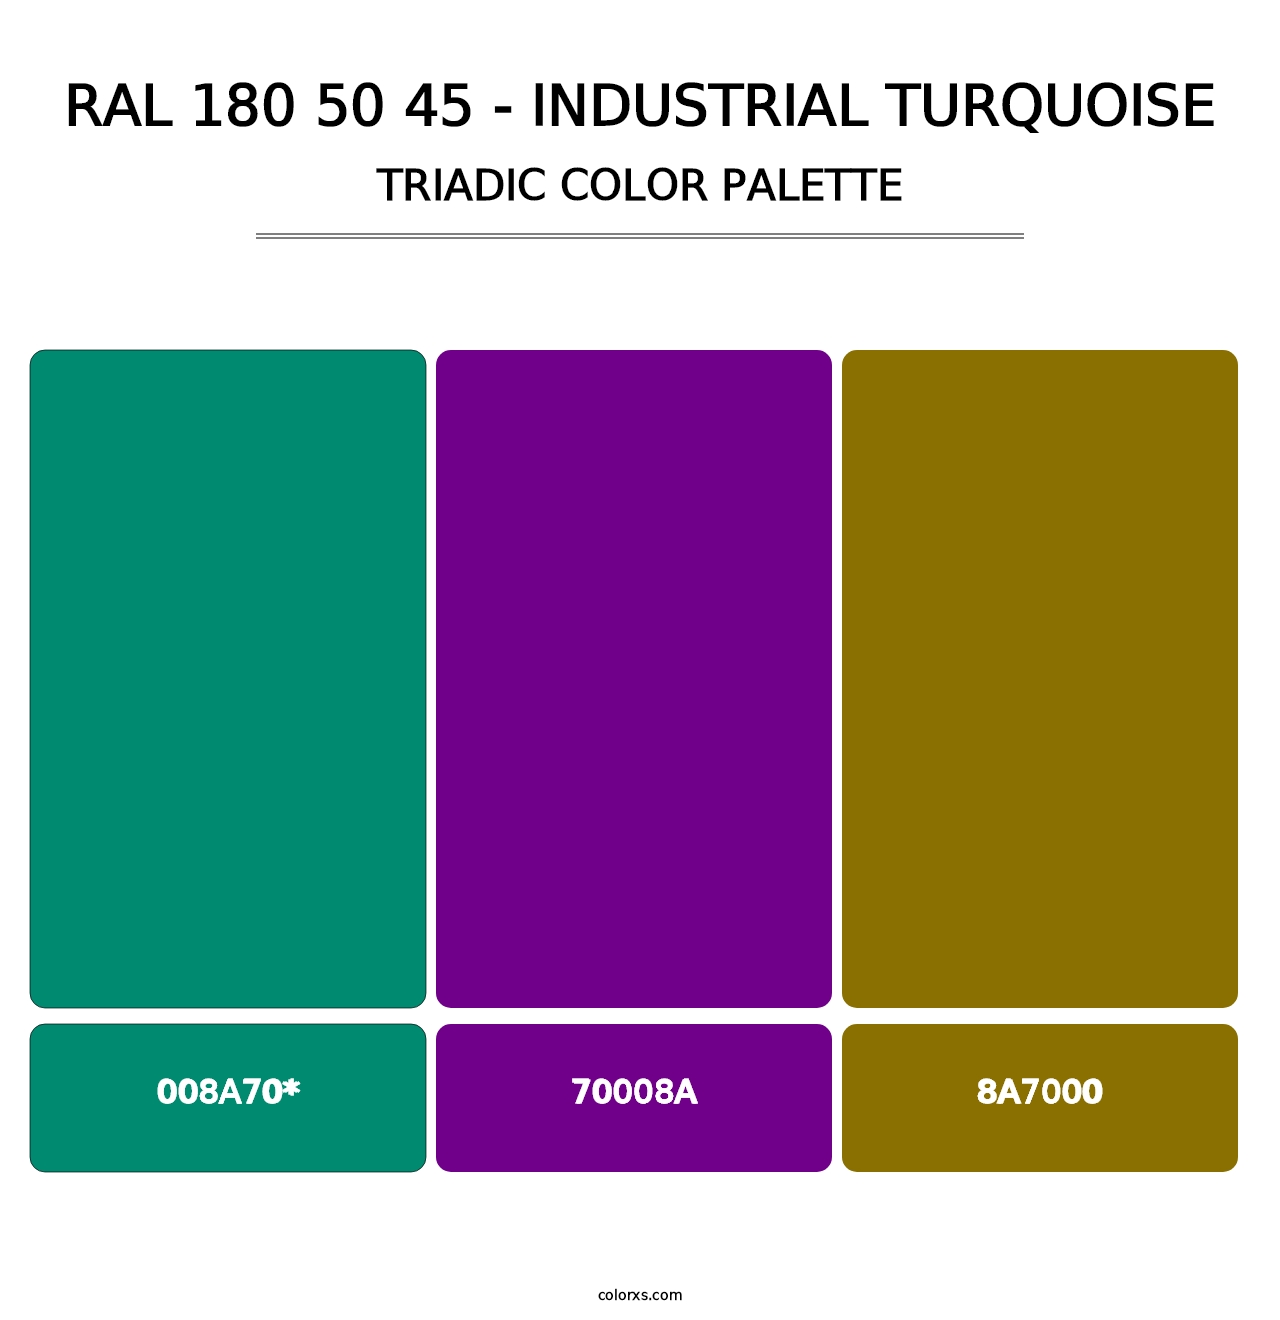 RAL 180 50 45 - Industrial Turquoise - Triadic Color Palette